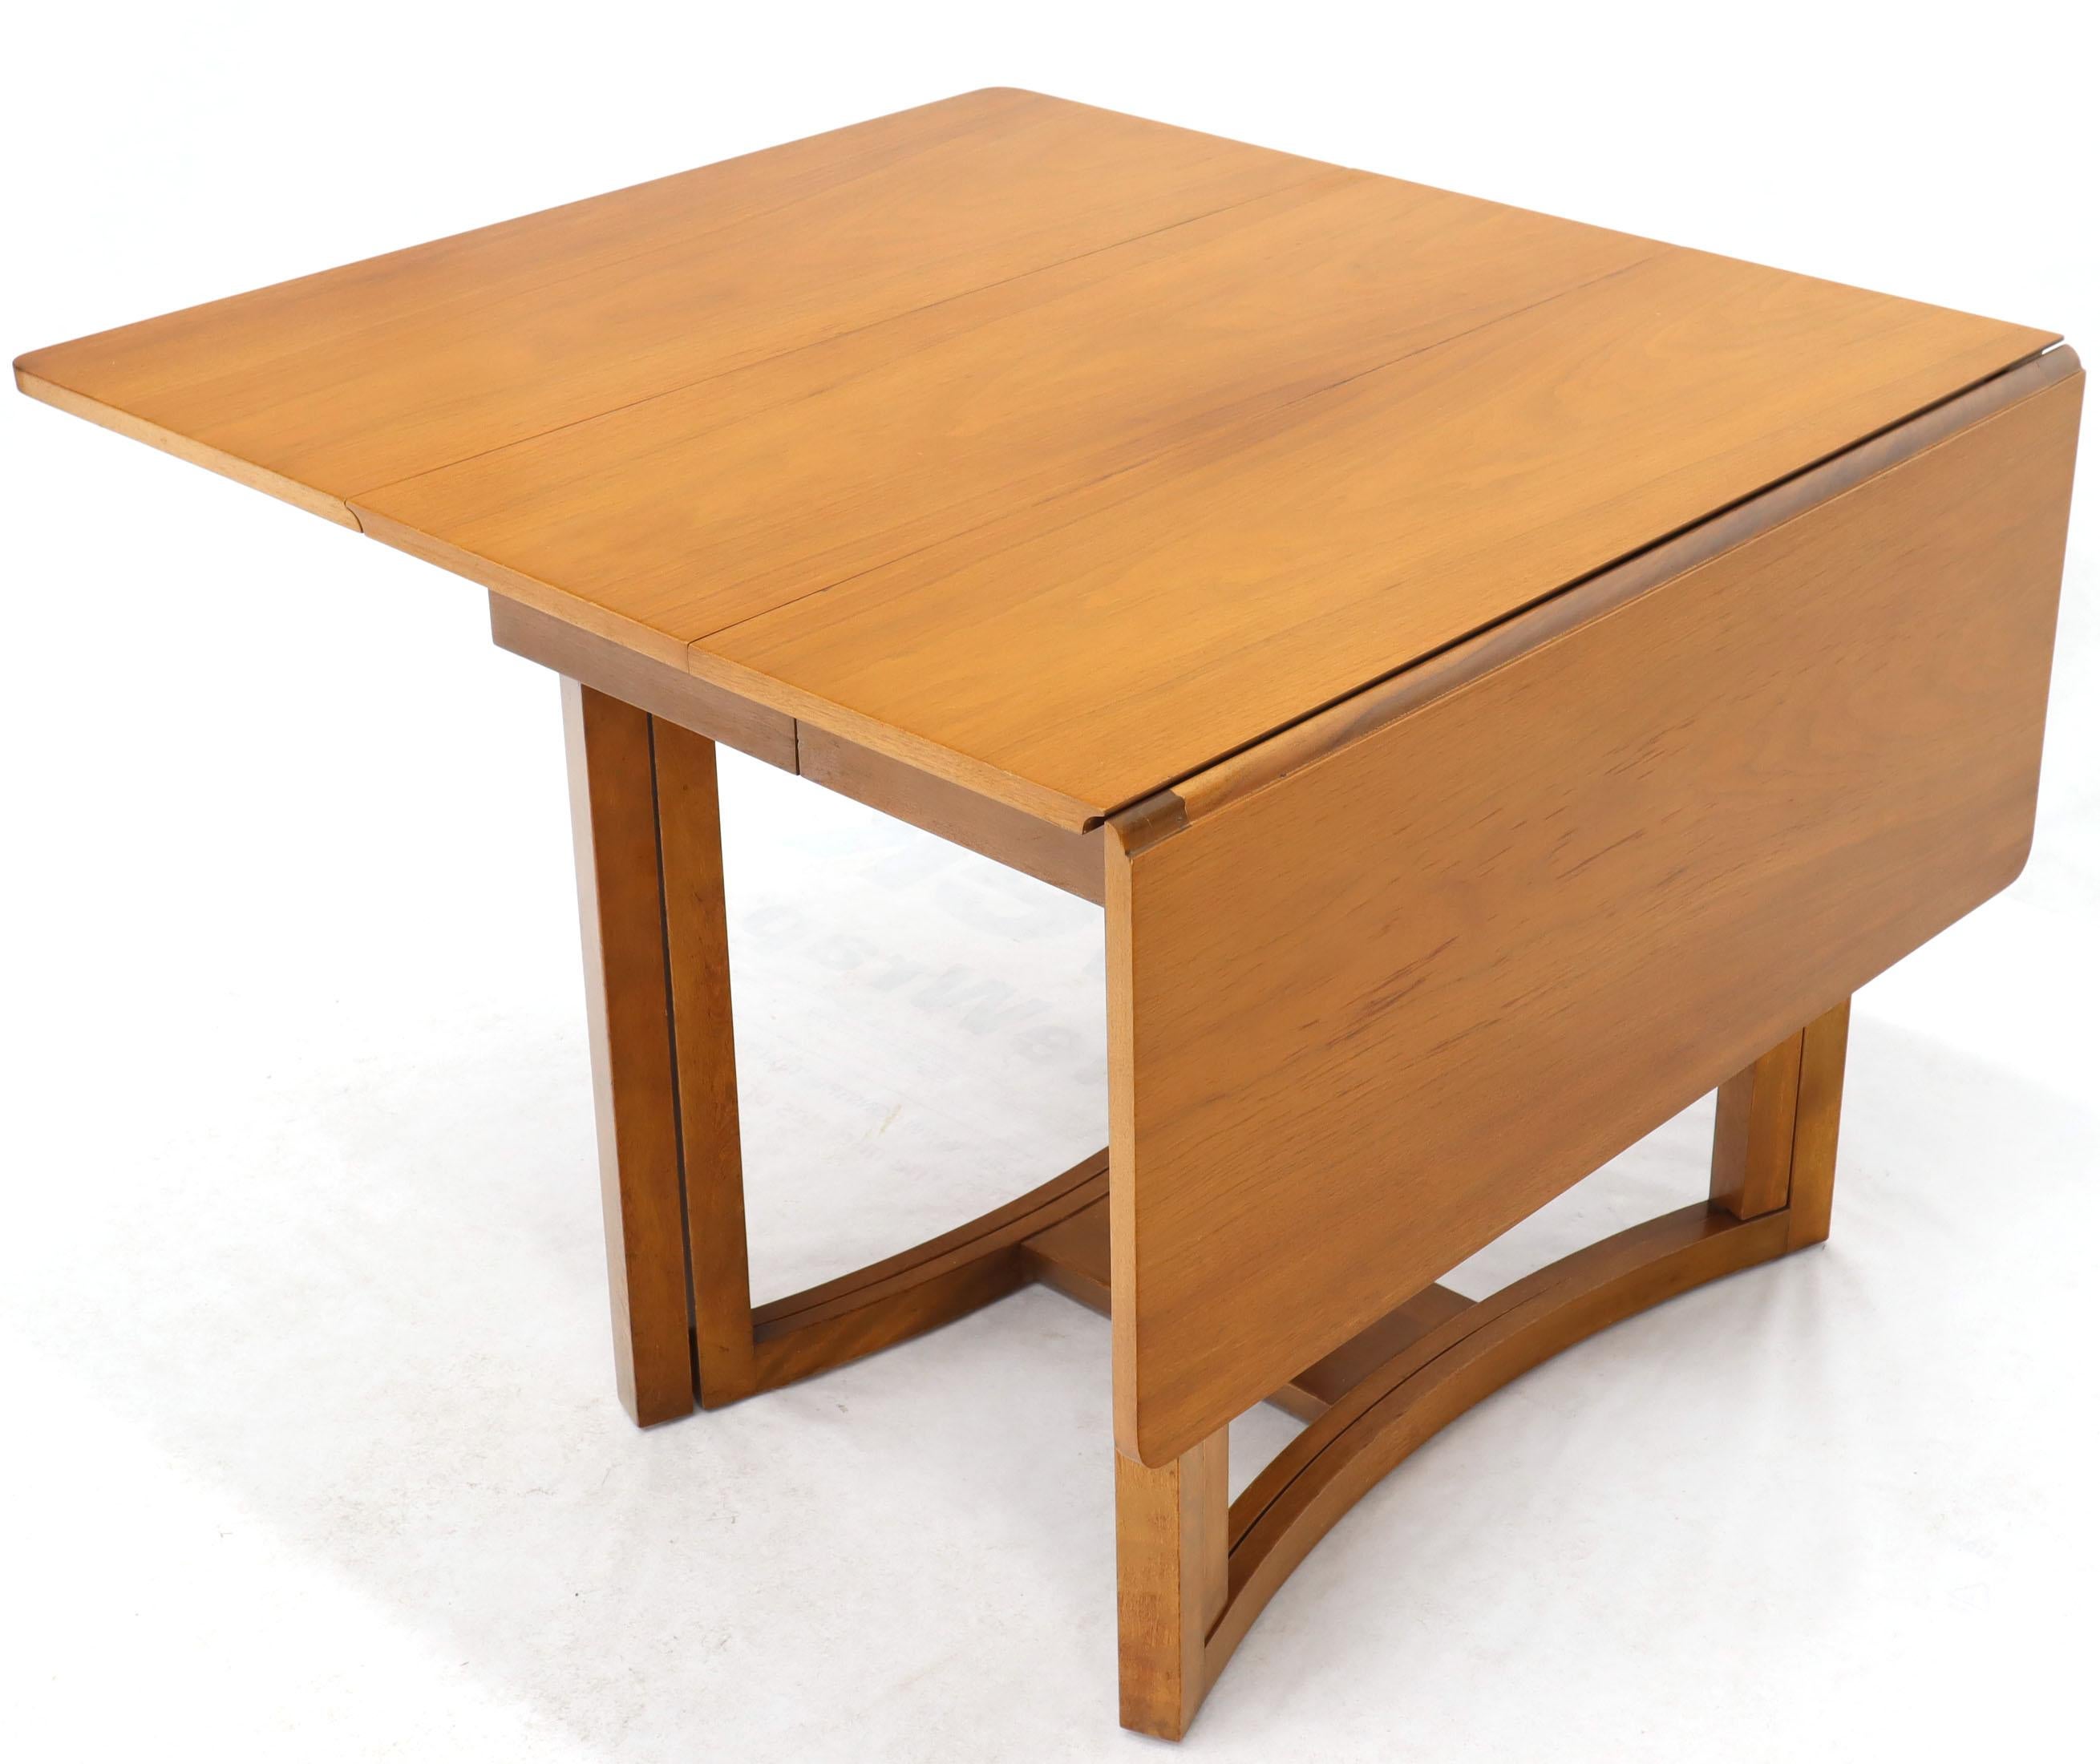 Midcentury Light Walnut Drop Leaf Expandable Dining Table, Three Leafs Boards im Angebot 1